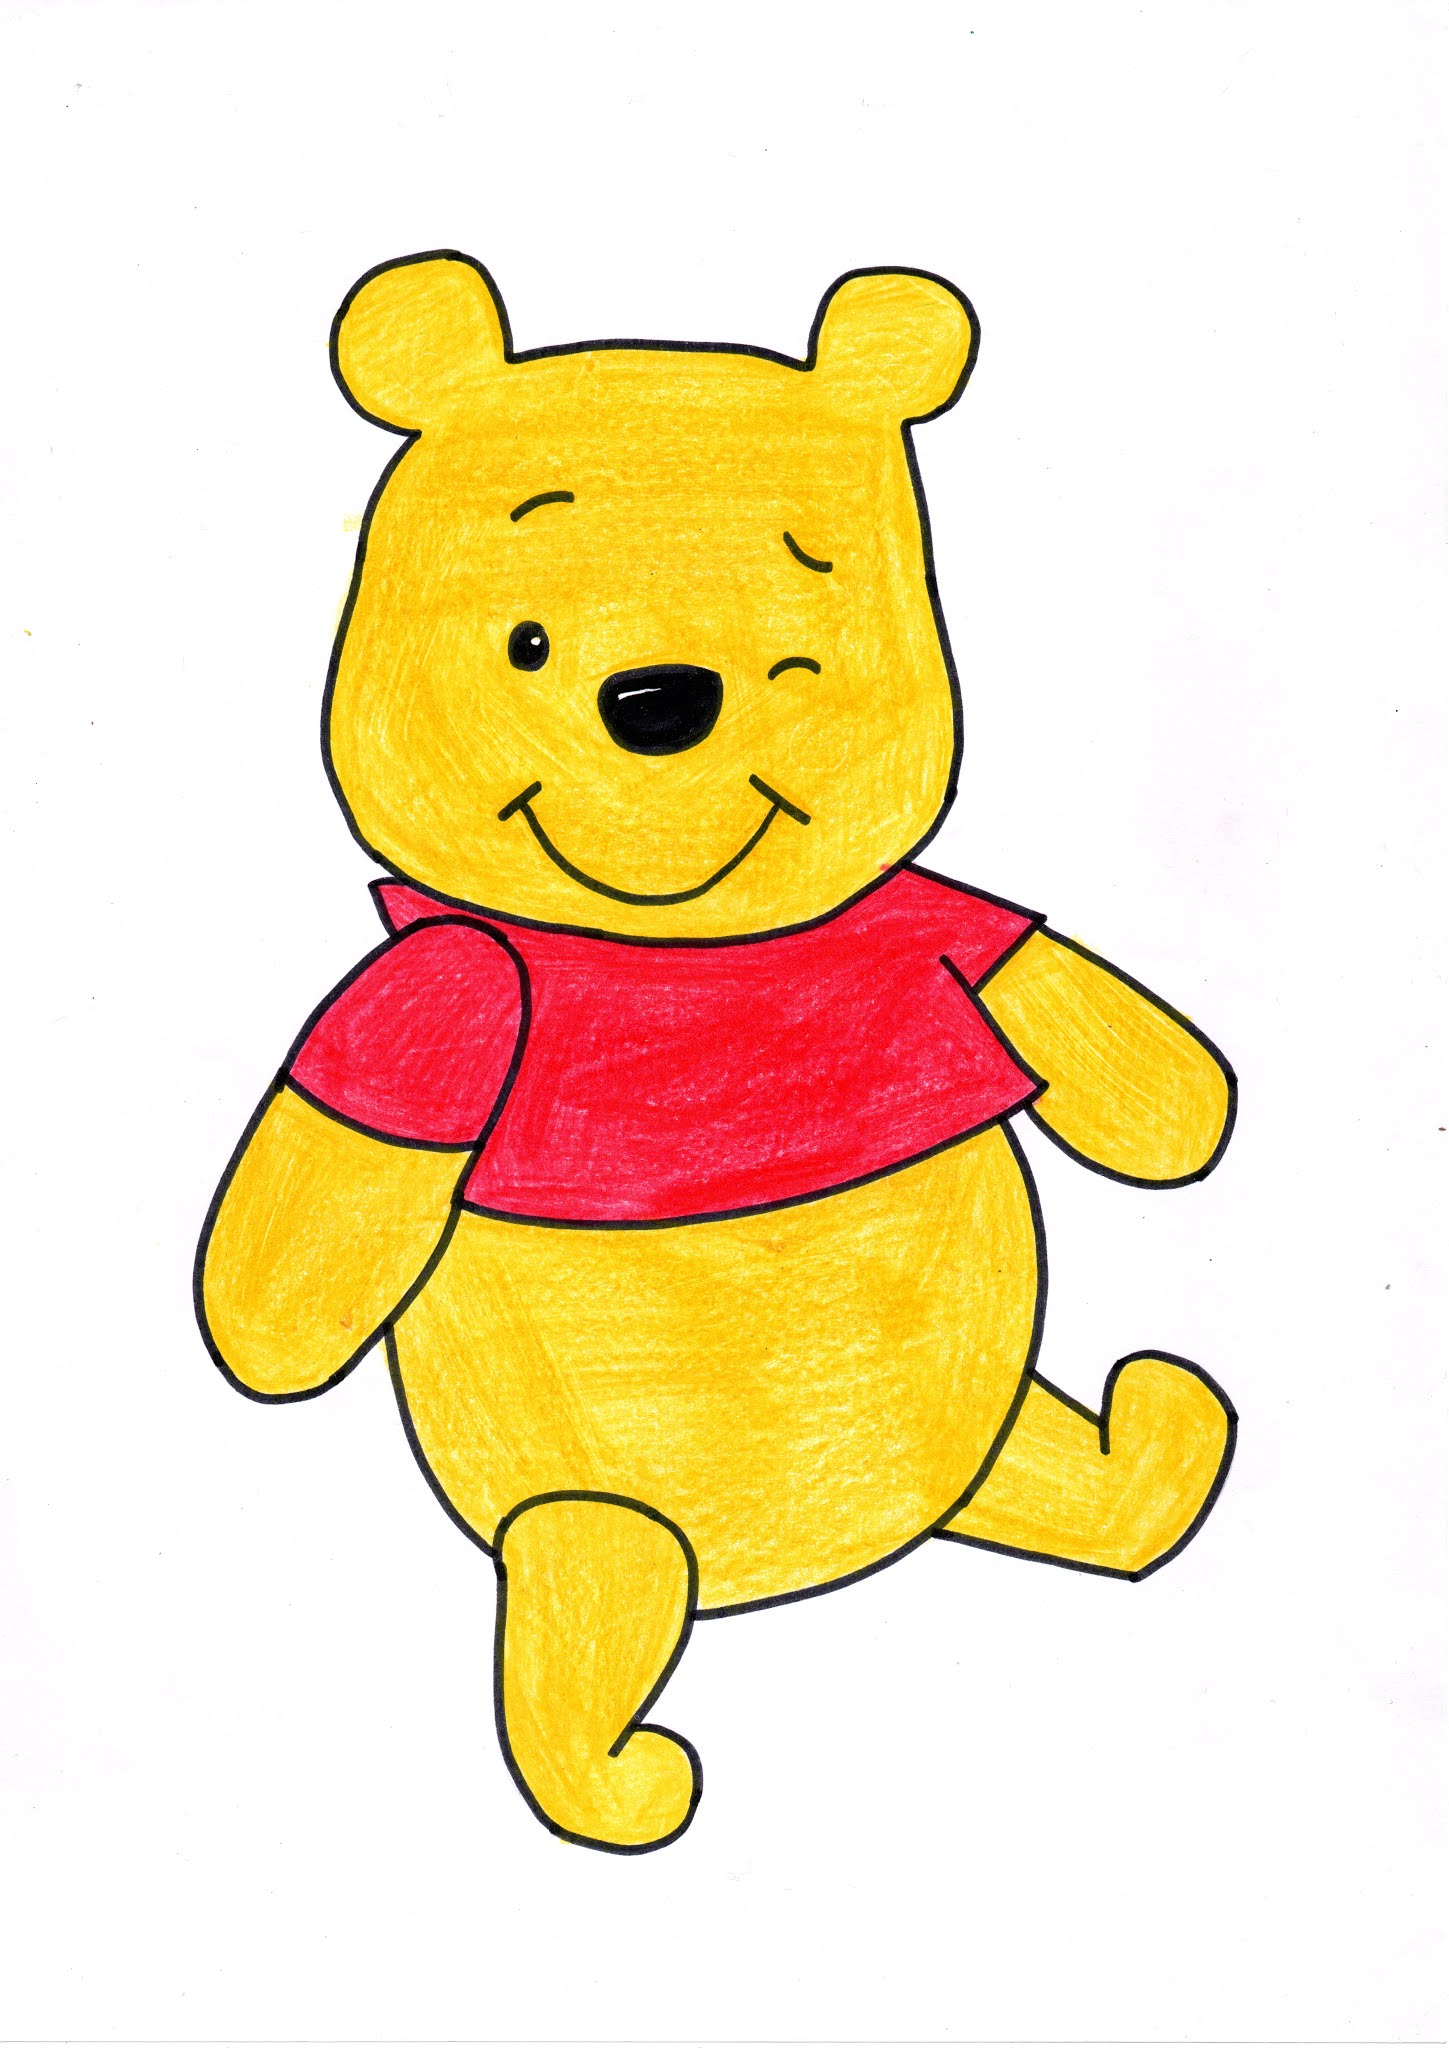 Learn How to Draw Pooh the Bear from Winnie the Pooh Winnie the Pooh Step  by Step  Drawing Tutorials